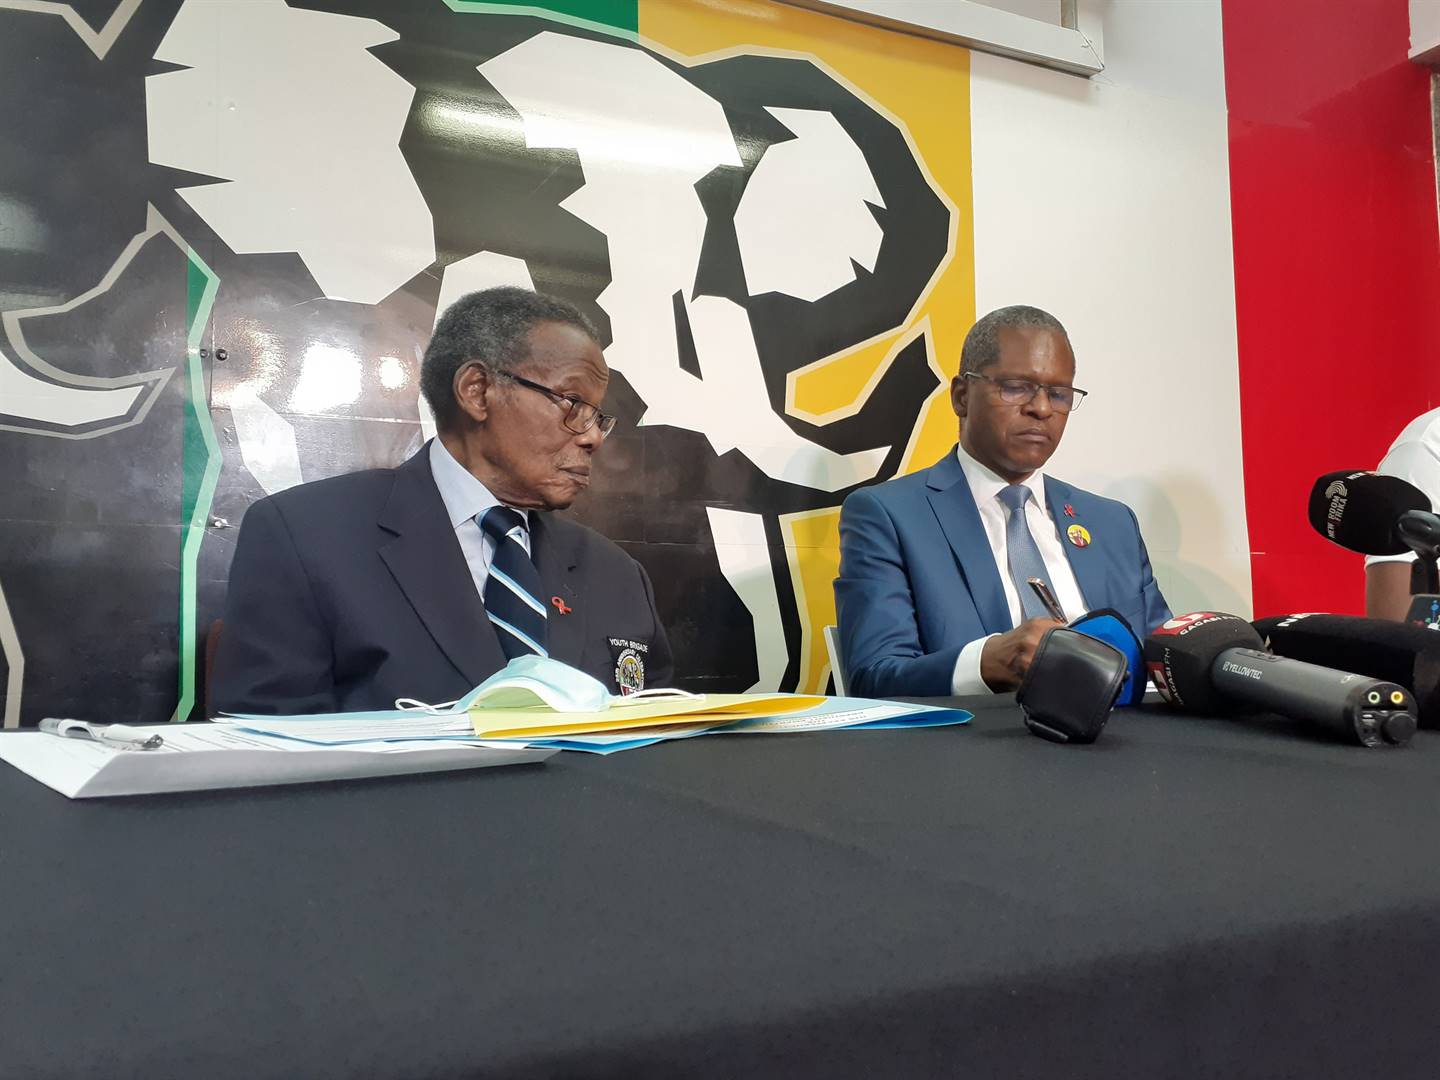 Mangosuthu Buthelezi, president emeritus of the Inkatha Freedom Party, with party president Velenkosini Hlabisa, during a press conference at the party’s headquarters in Durban.